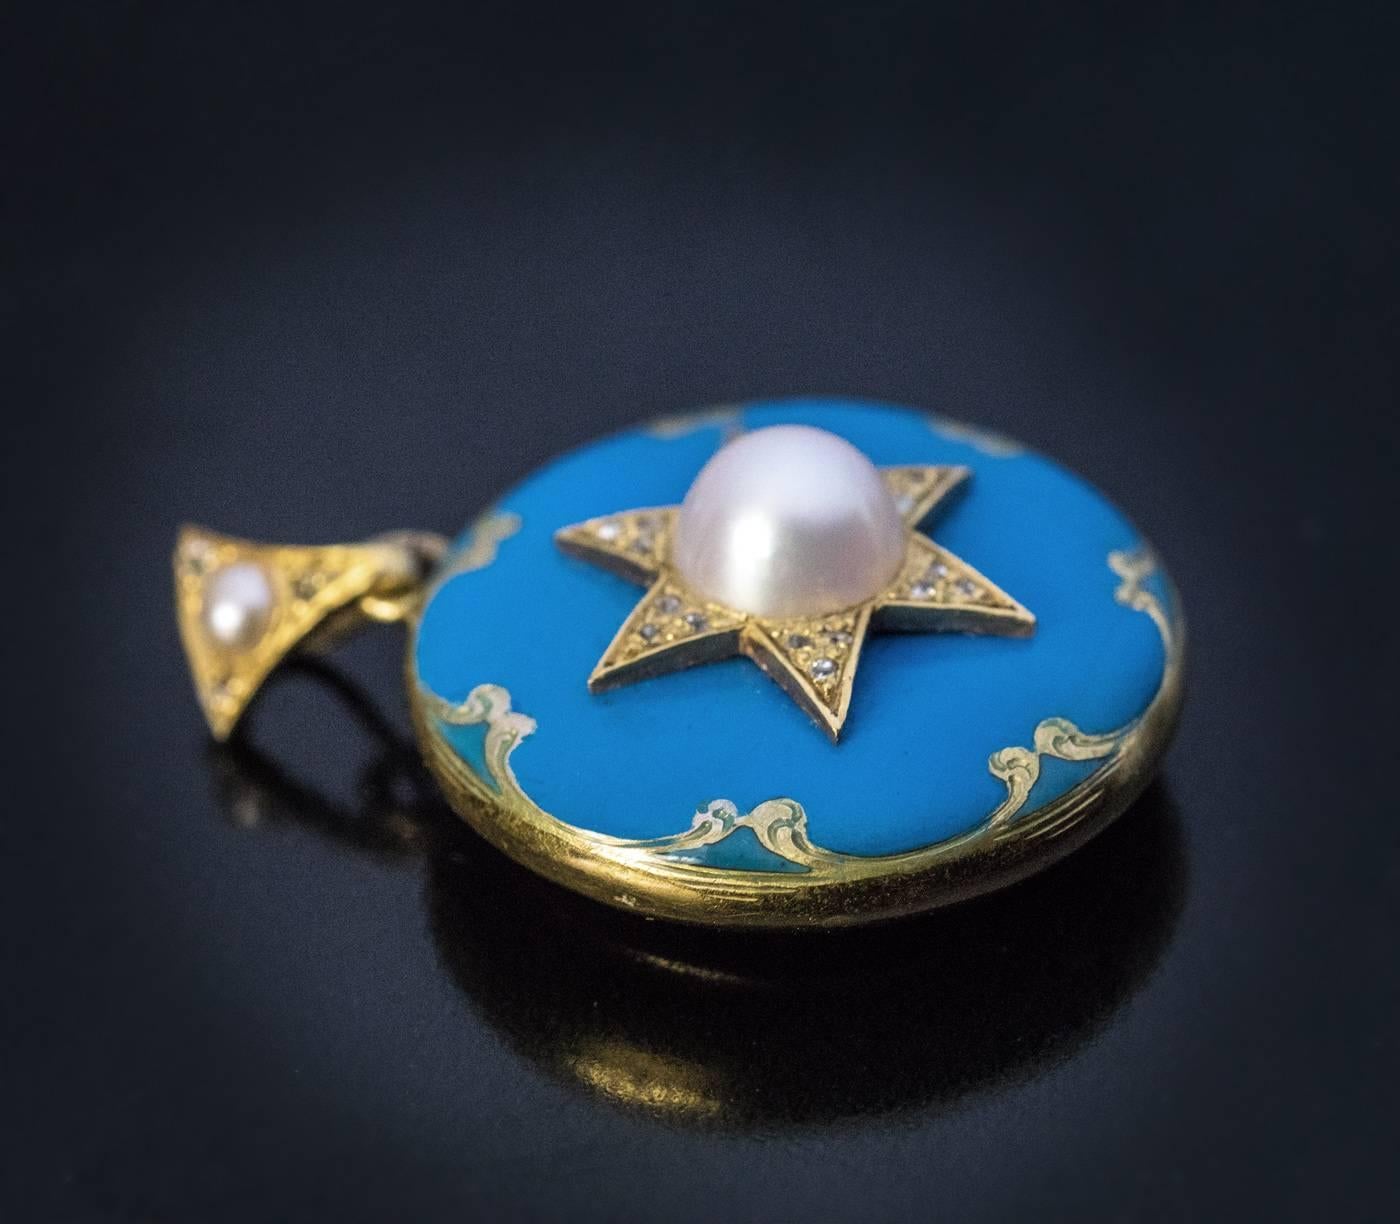 Circa 1870

An antique Victorian 14K gold star-motif locket pendant is embellished with glossy turquoise blue enamel, two half pearls, and tiny old mine cut diamonds. The back is set with a glazed compartment.

Diameter 25 mm (1 in.)

Sold without